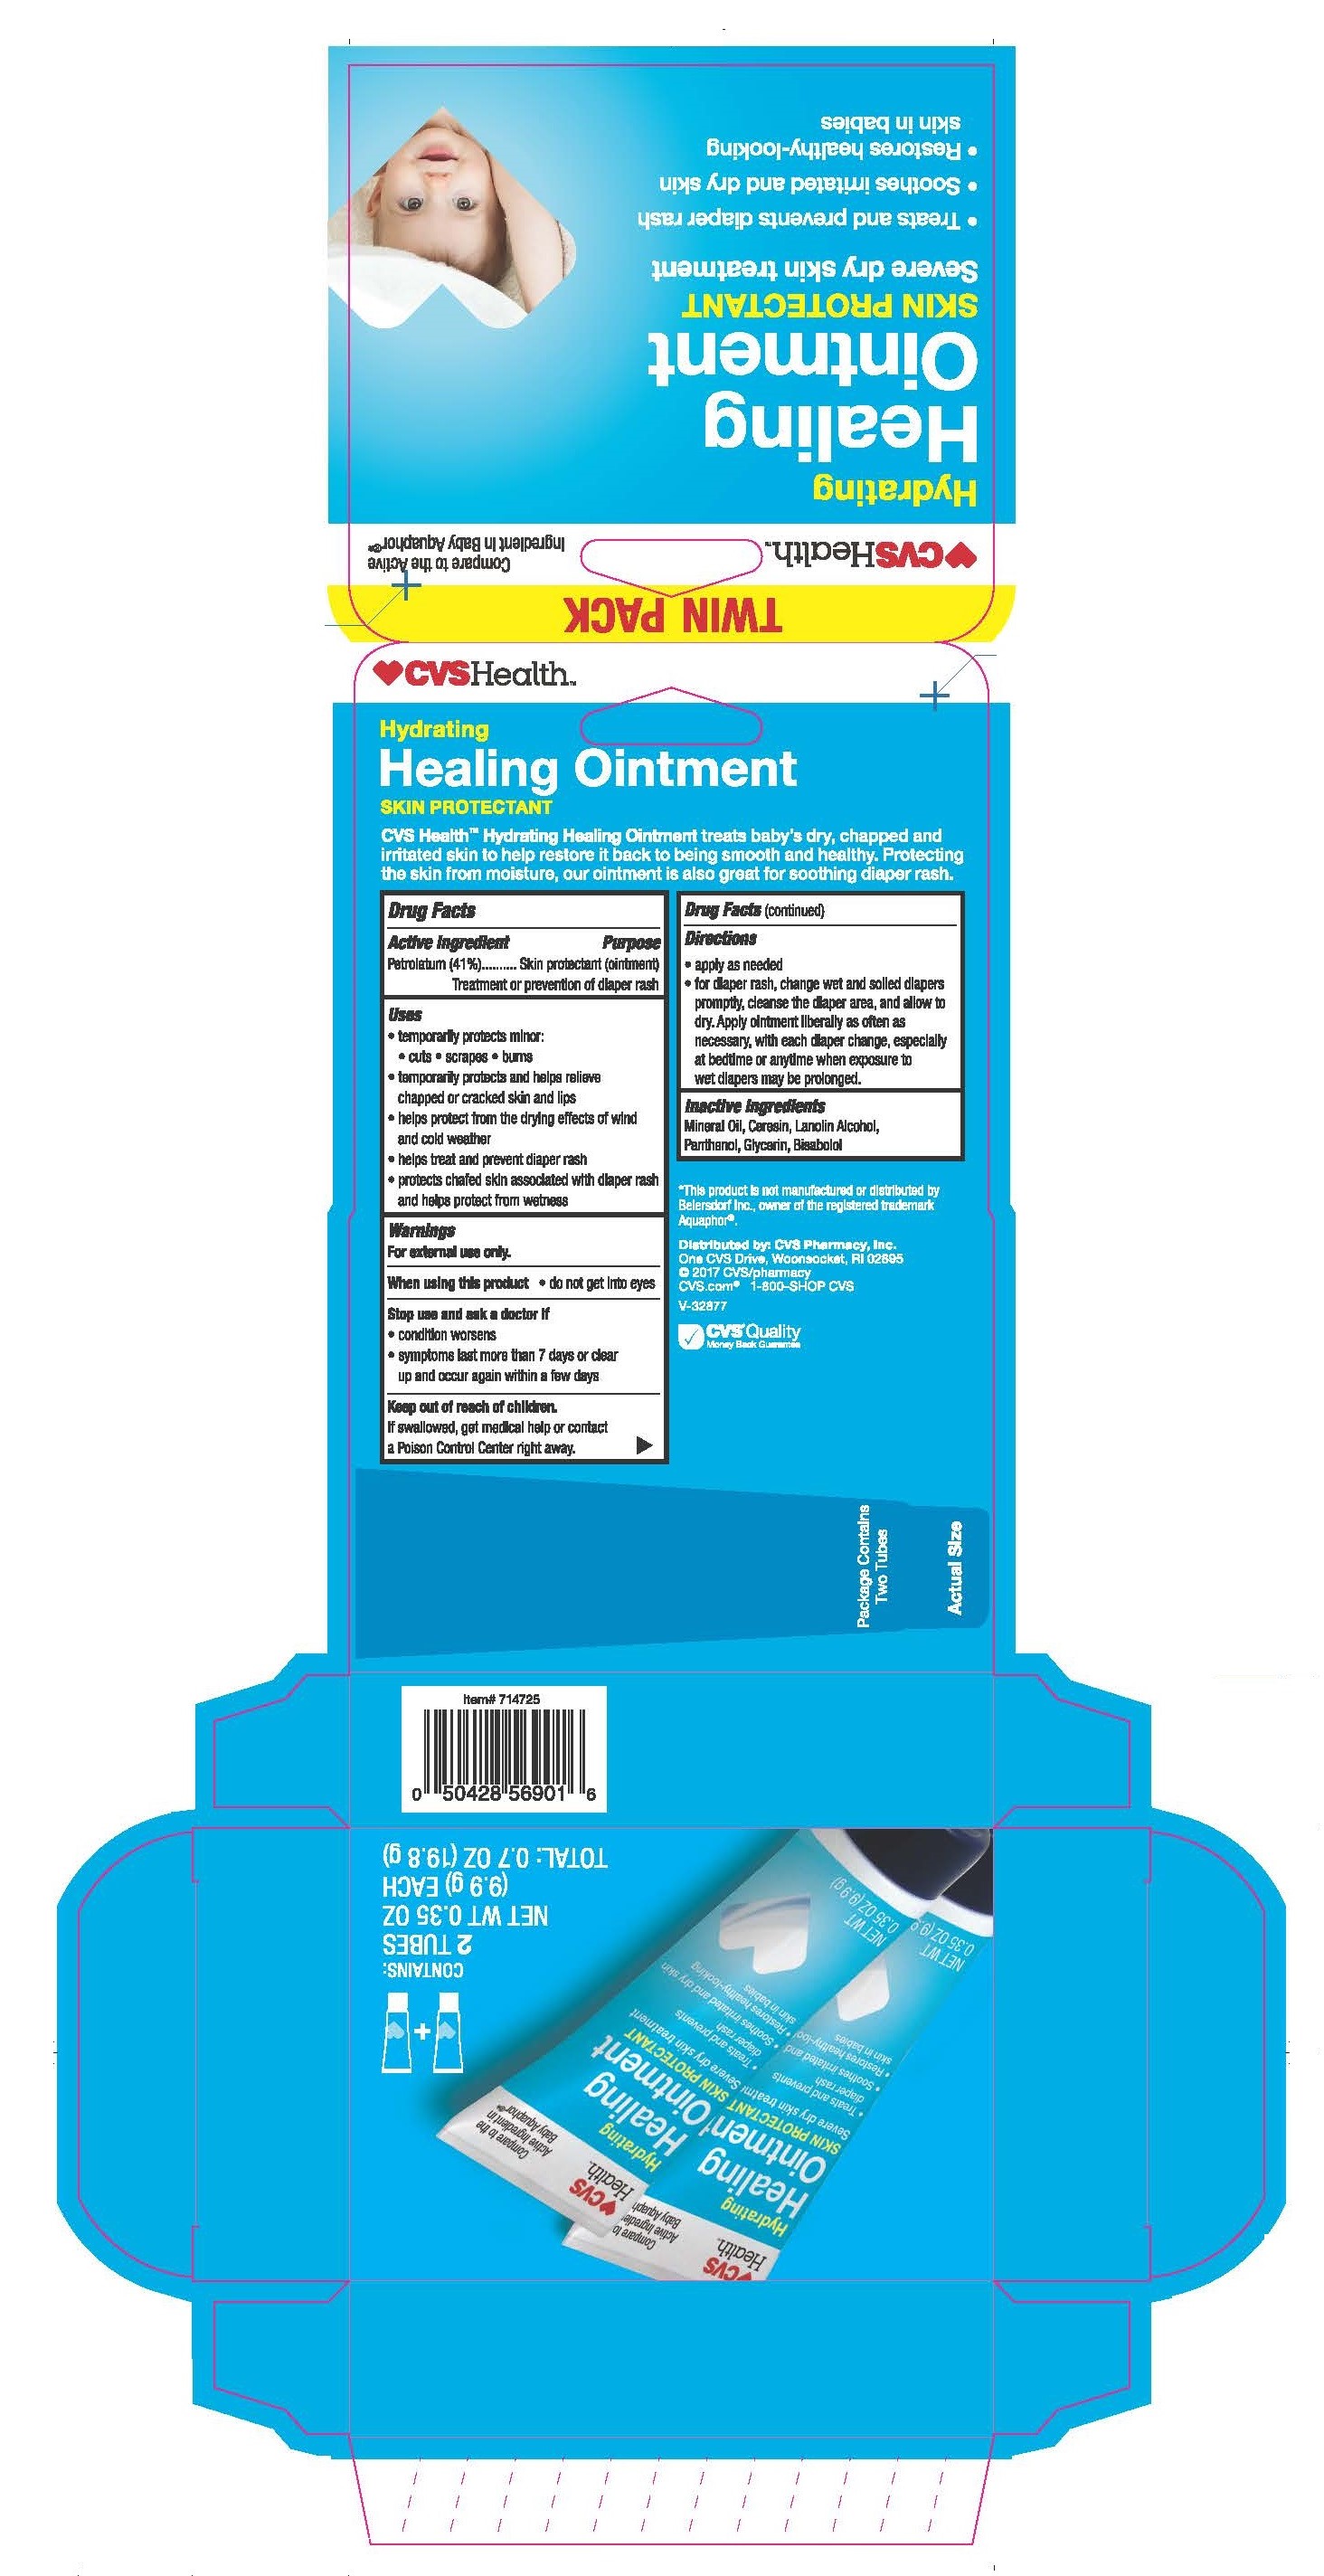 Hydrating Healing Skin Protectant | Petrolatum Ointment Ointment while Breastfeeding